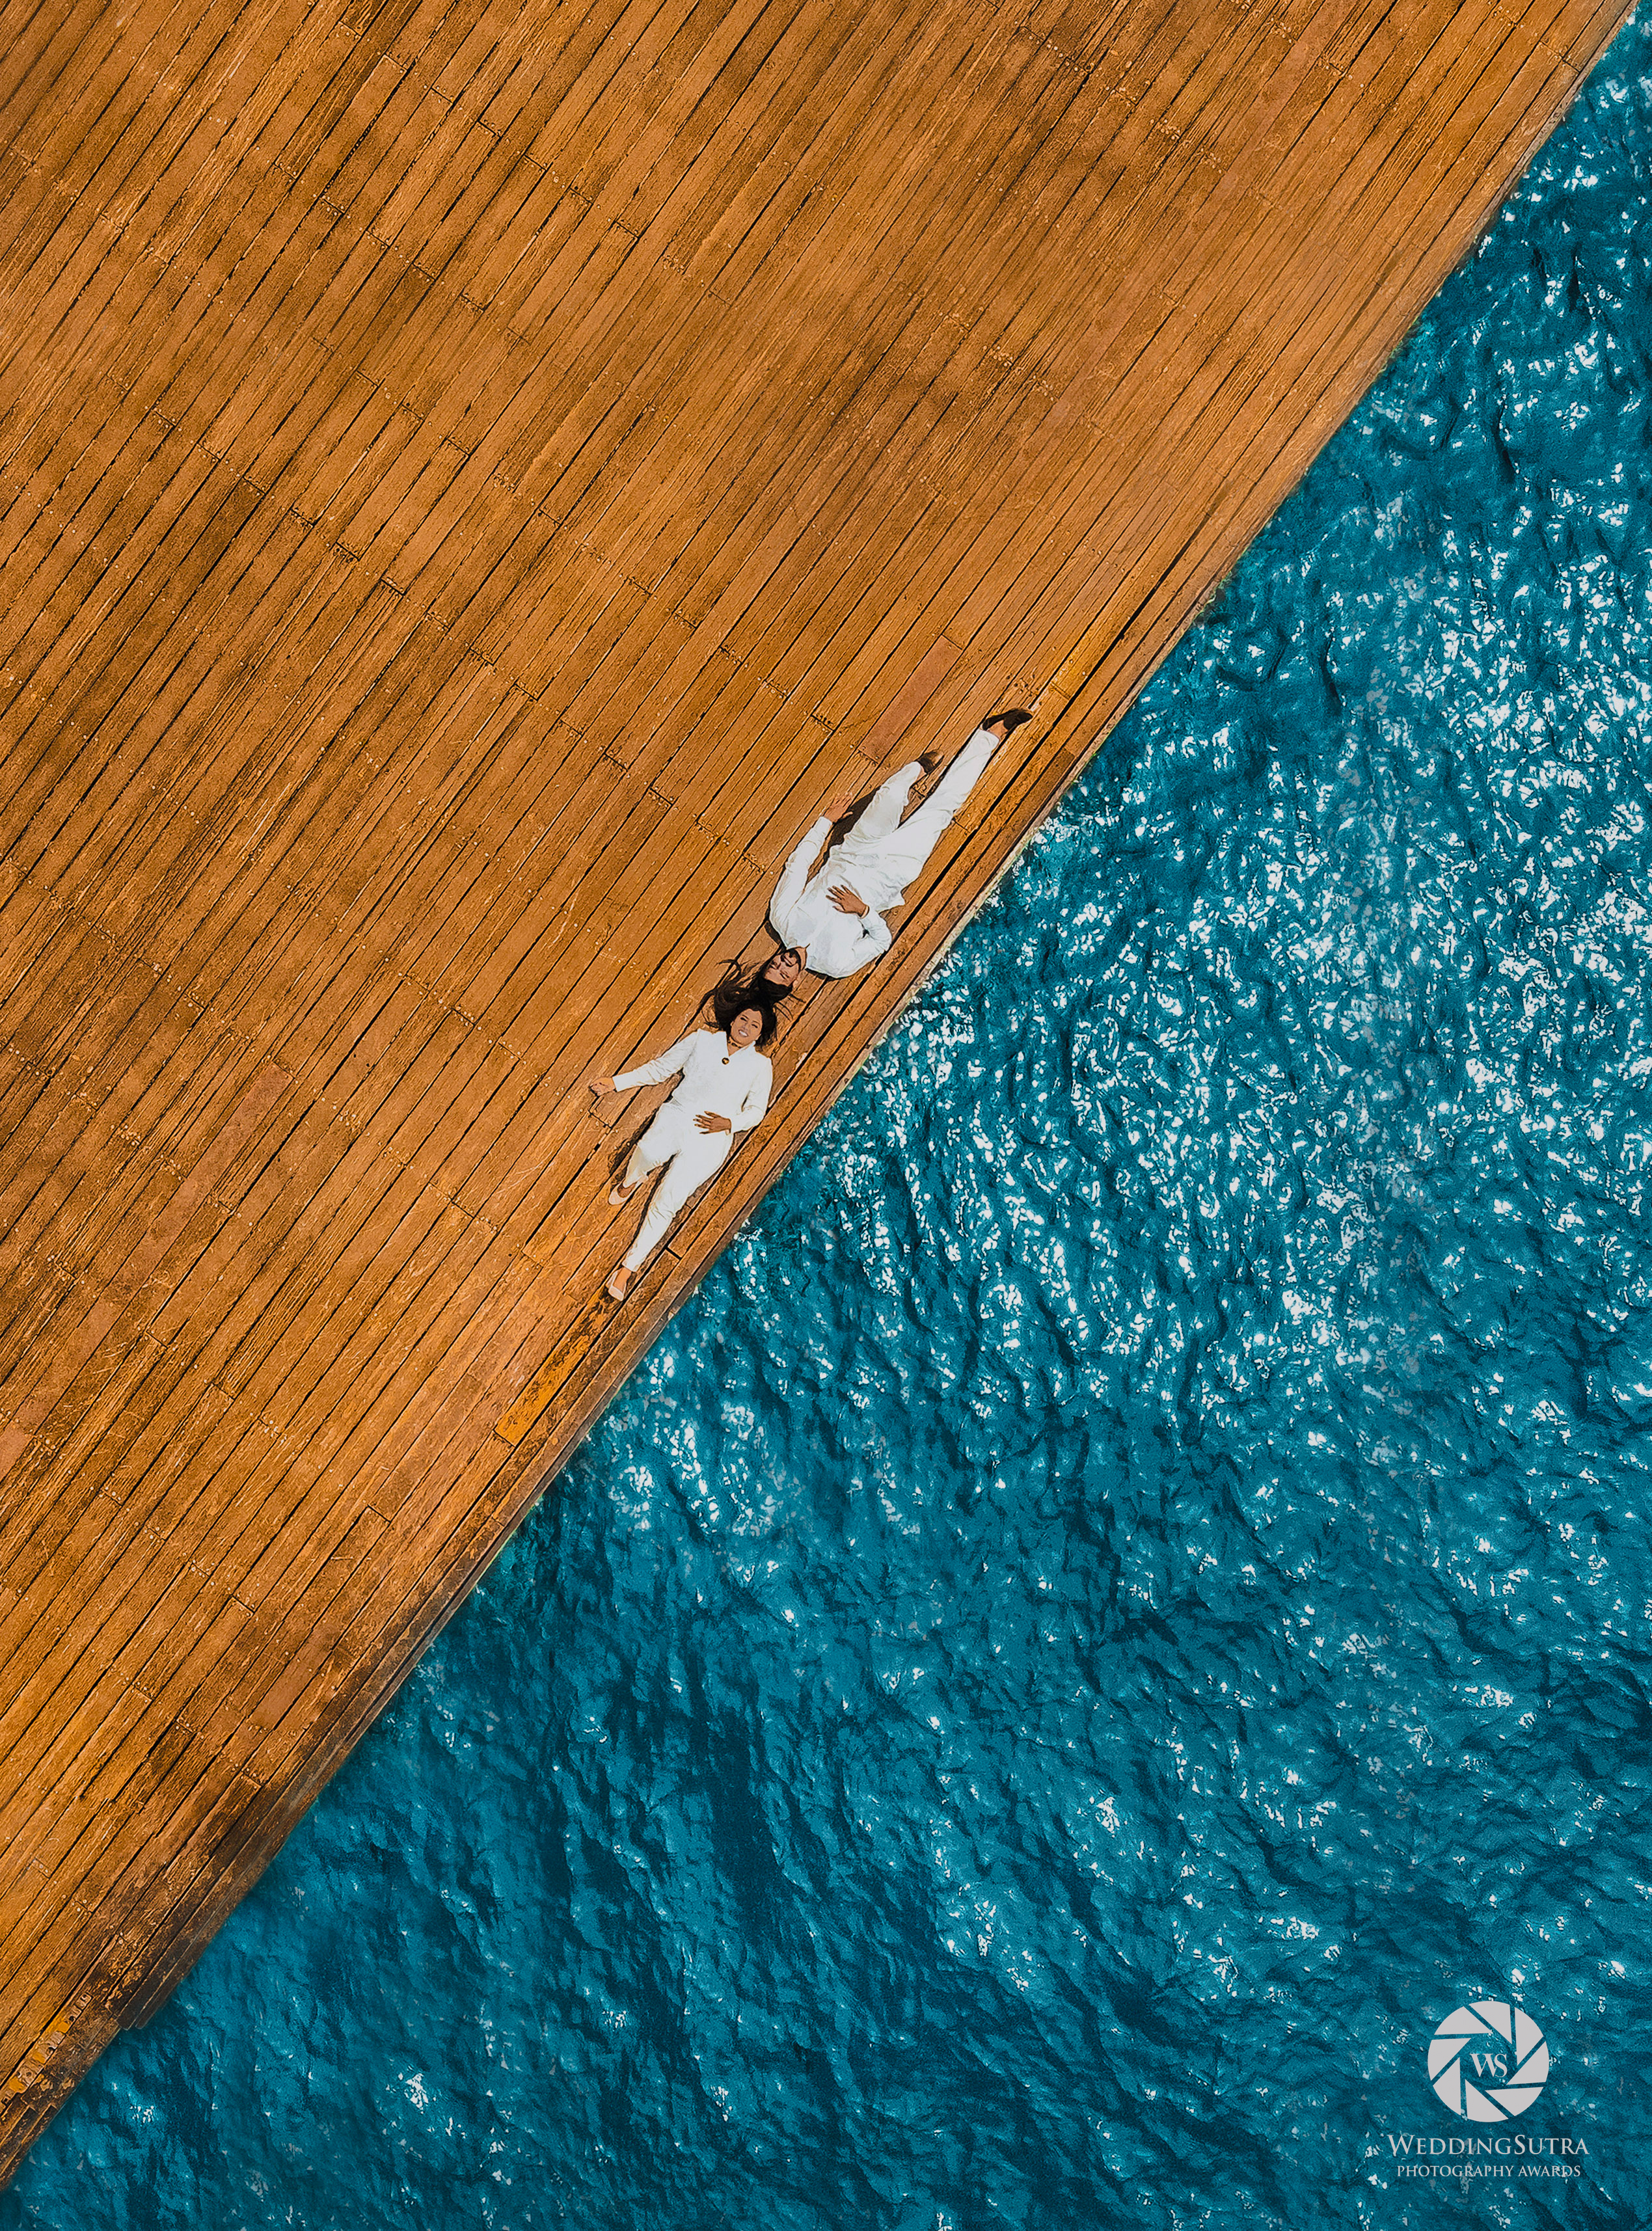 Photography Awards 2021 - Aerial